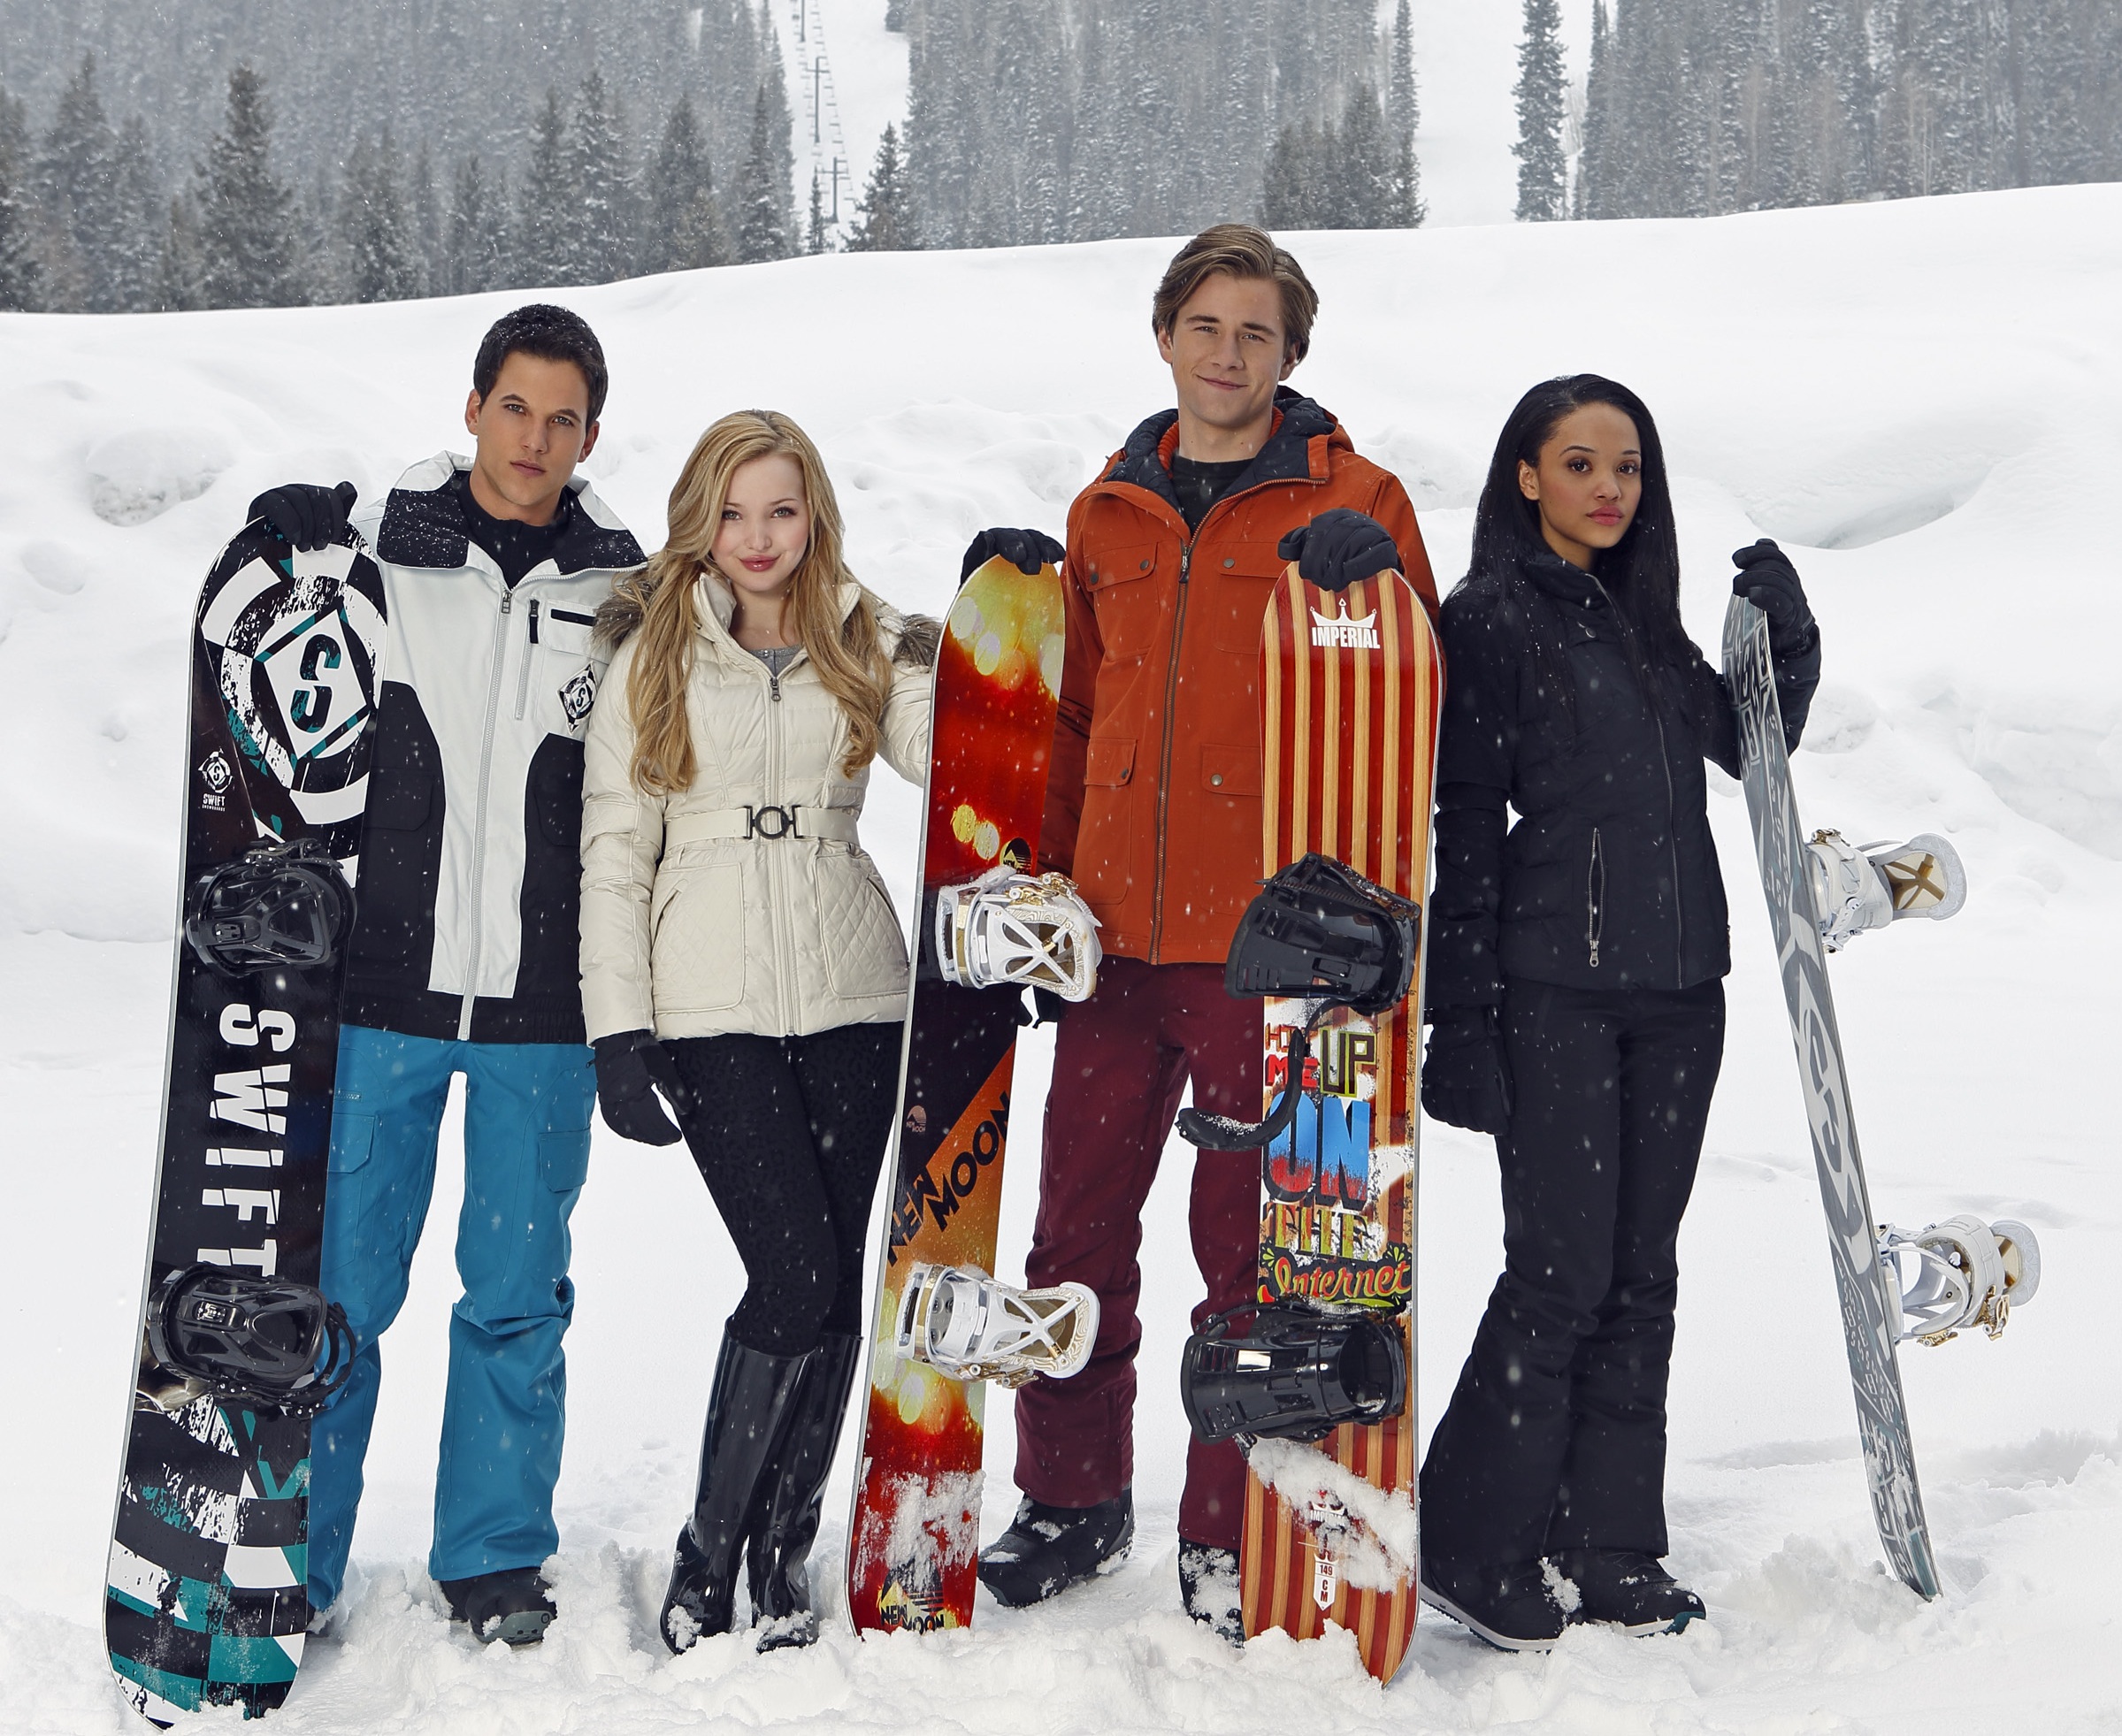 Before she was Mal, Dove Cameron made her DCOM debut in Cloud 9 about the w...